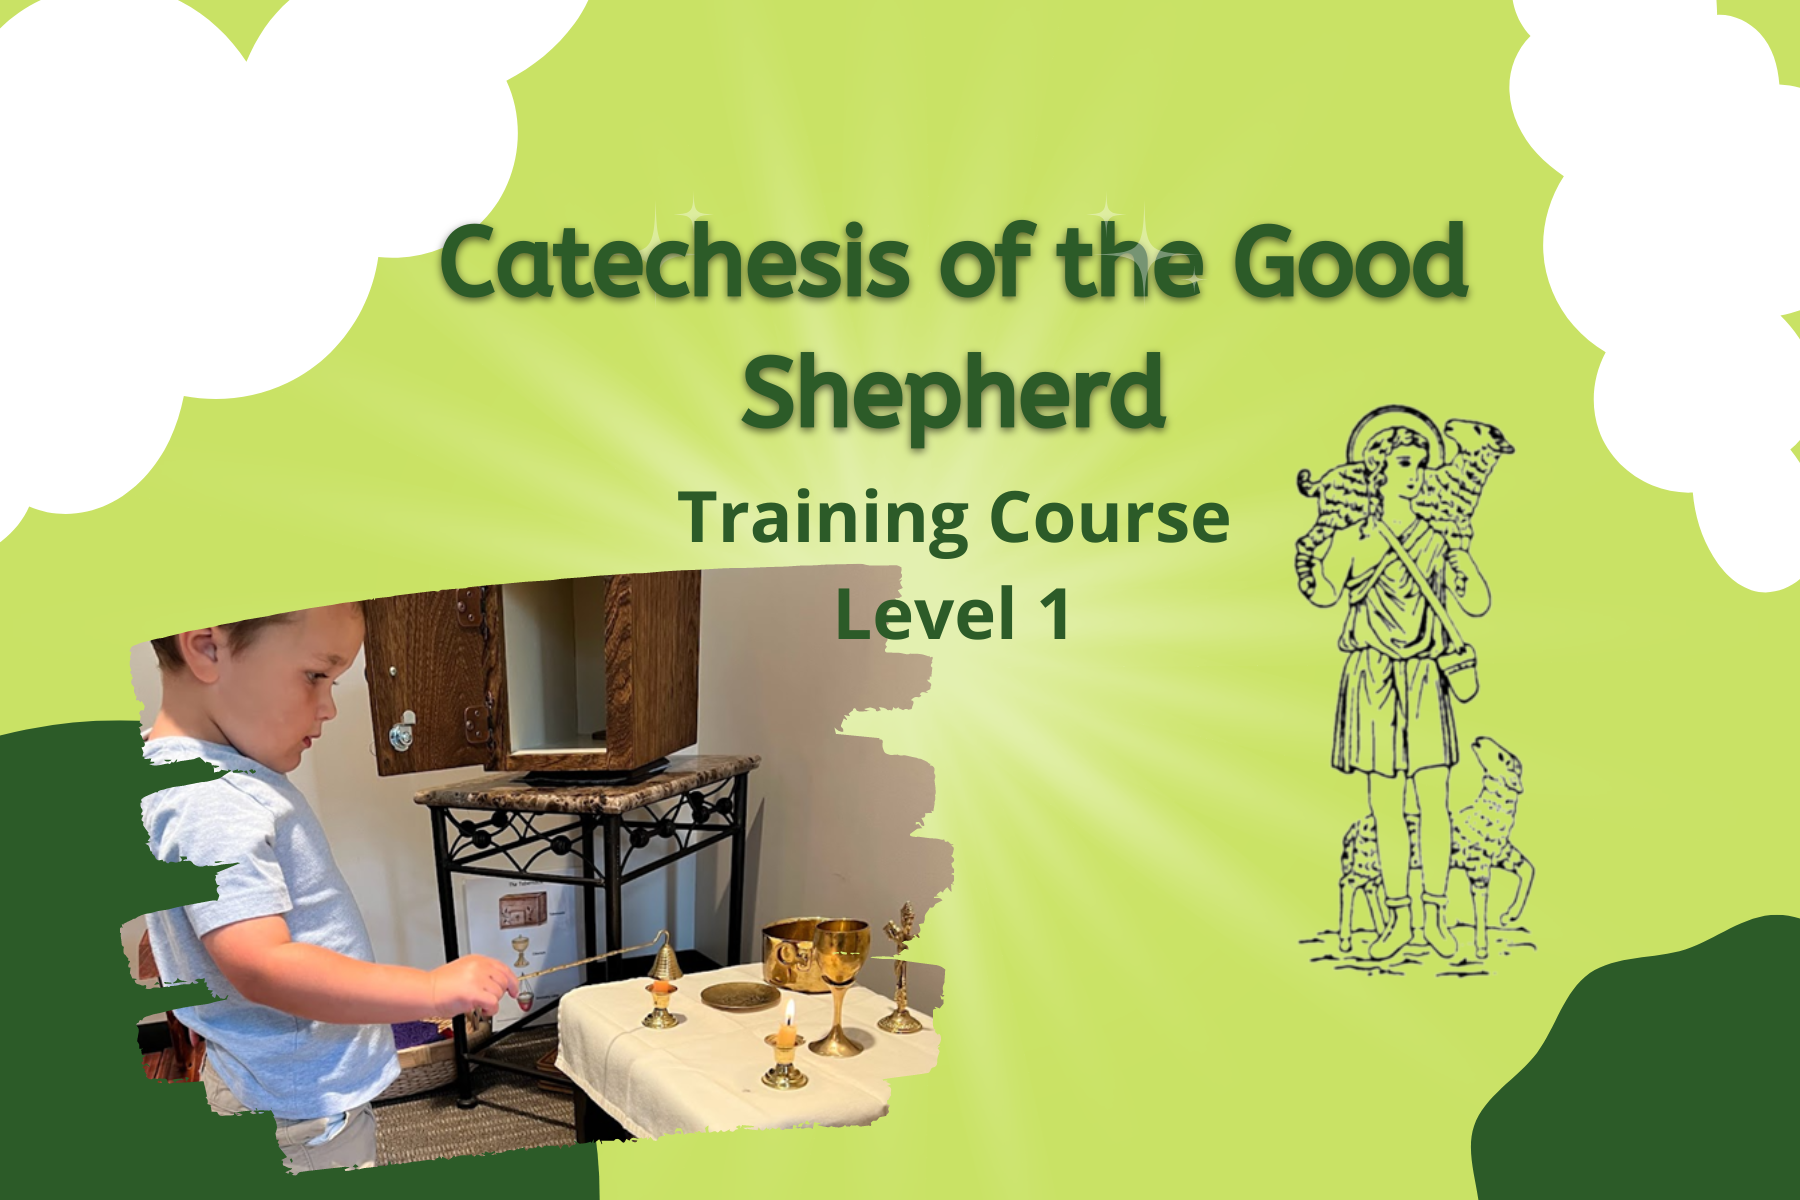 Catechesis of the Good Shepherd Training Course Level 1